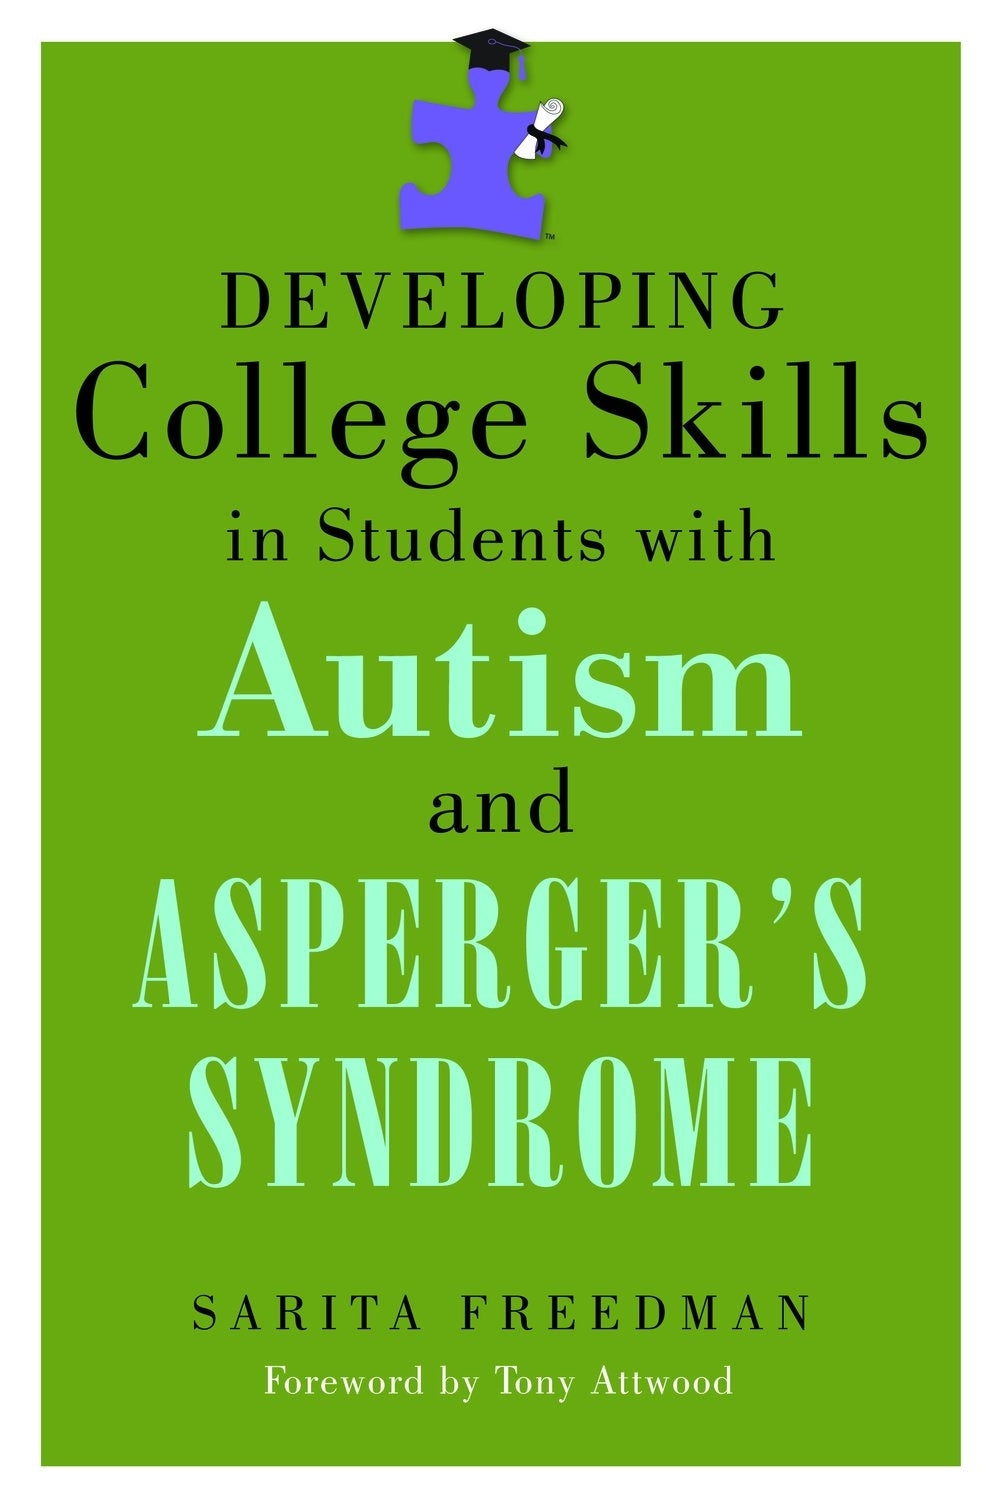 Developing College Skills in Students with Autism and Asperger's Syndrome by Dr Anthony Attwood, Sarita Freedman